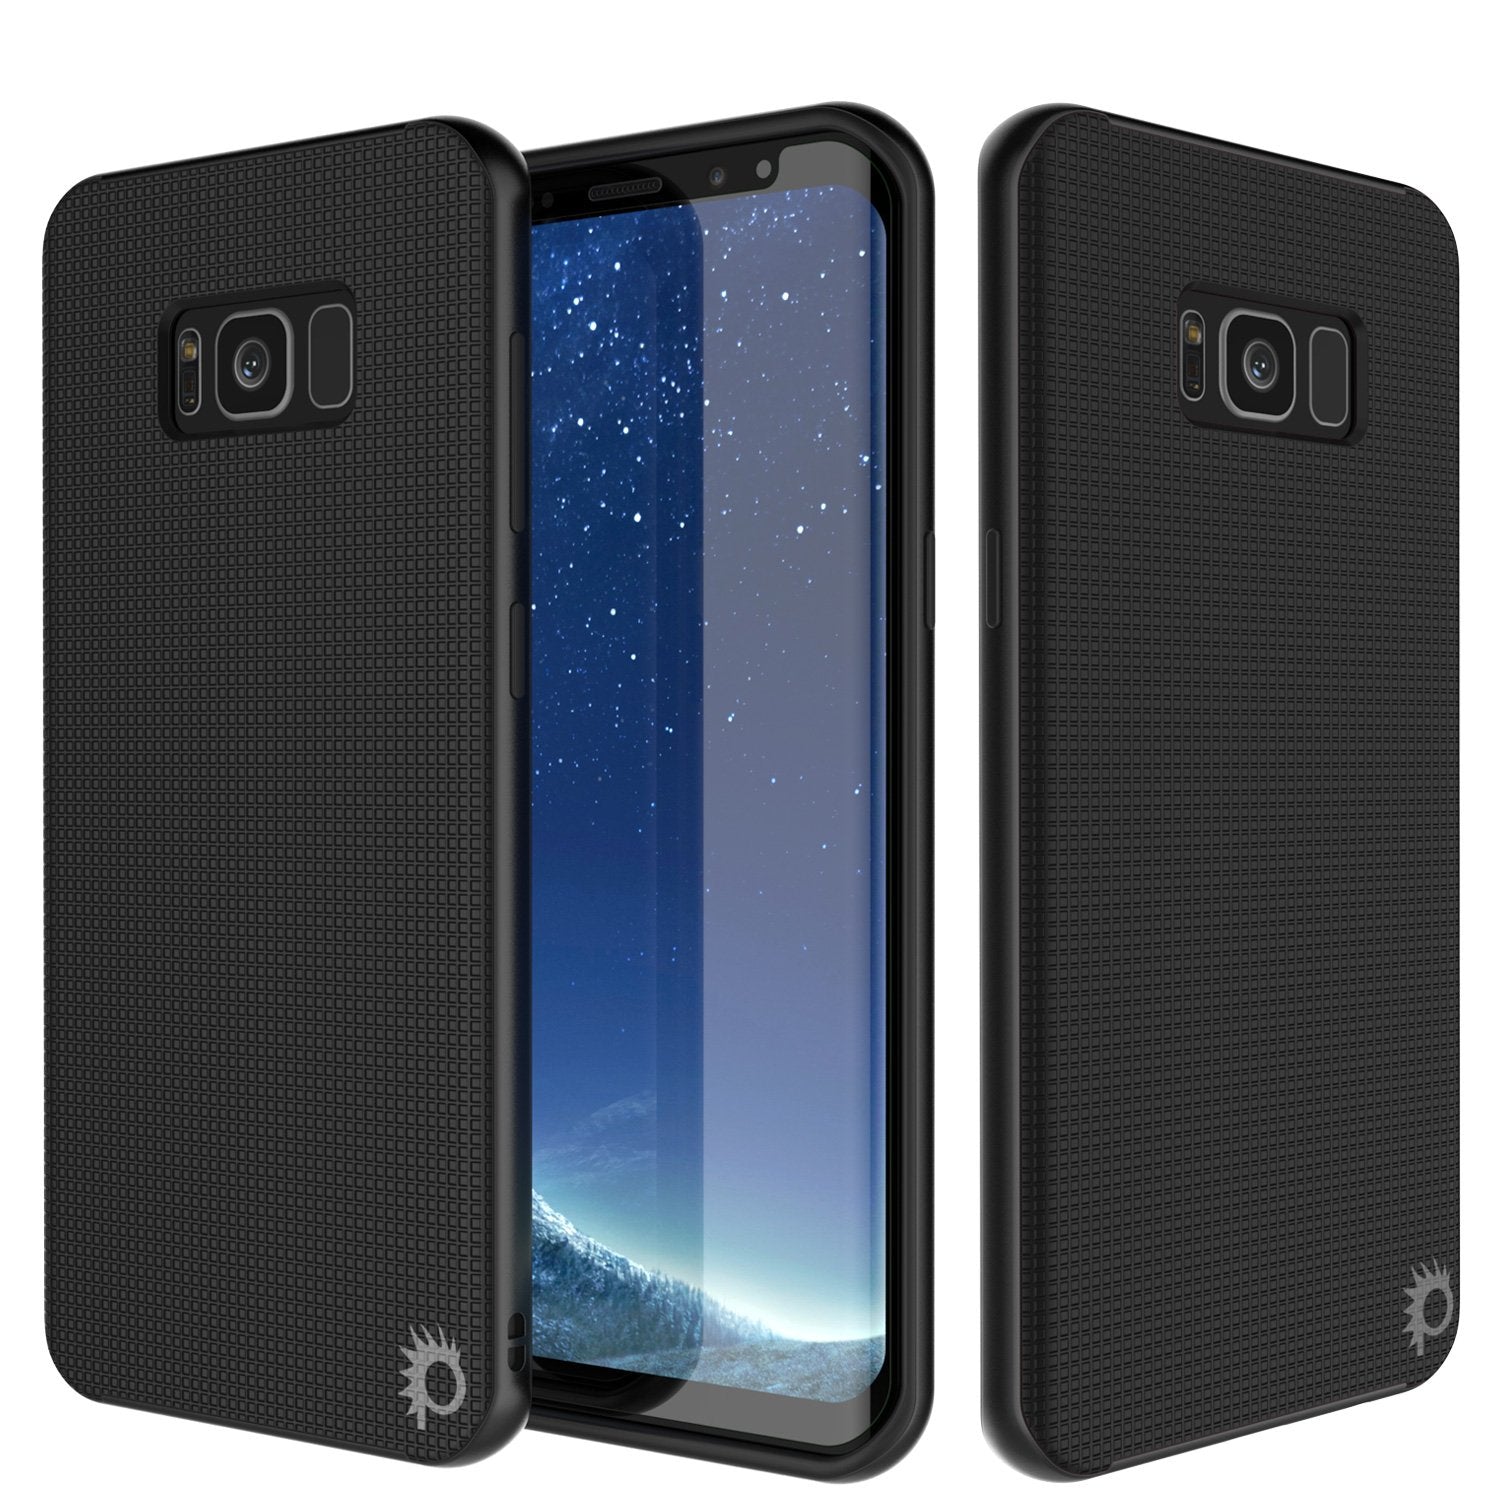 Galaxy S8 Case, PunkCase [Stealth Series] Hybrid 3-Piece Shockproof Dual Layer Cover [Non-Slip] [Soft TPU + PC Bumper] with PUNKSHIELD Screen Protector for Samsung S8 Edge [Black]